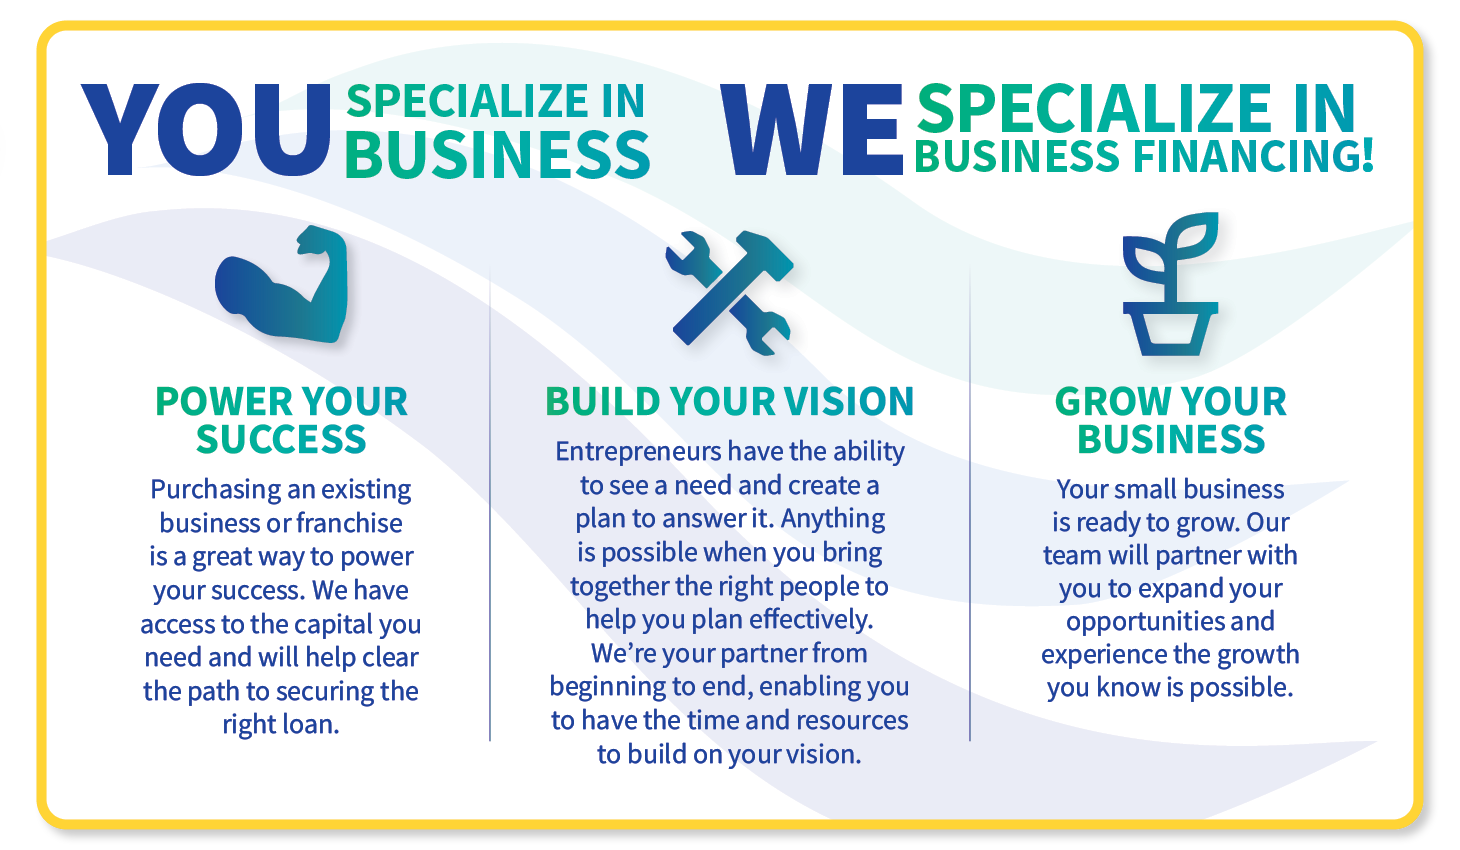 You specialize in business. We specialize in business financing!